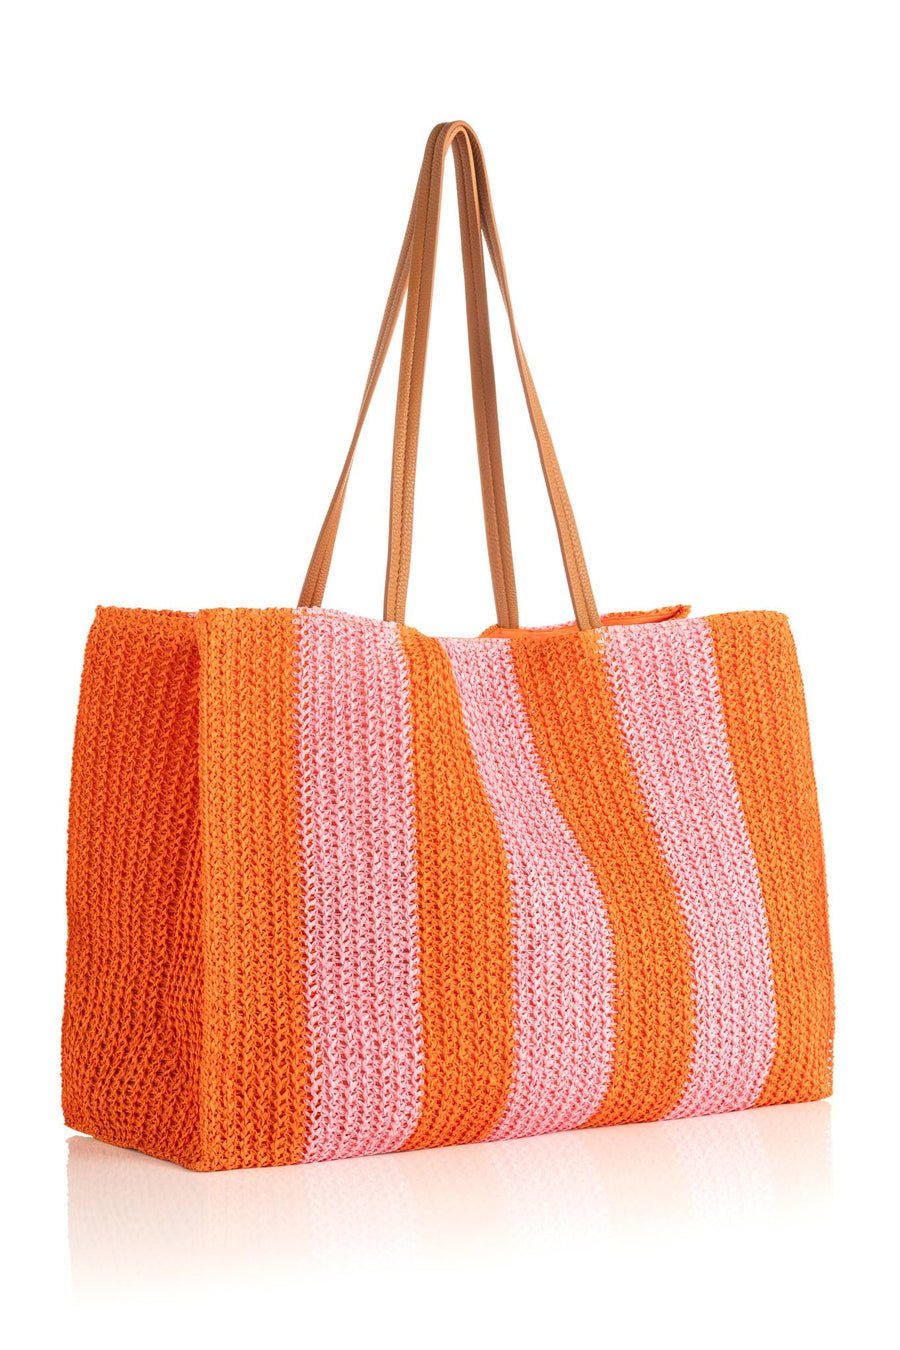 Filomena Tote: Candy - Bloom and Petal